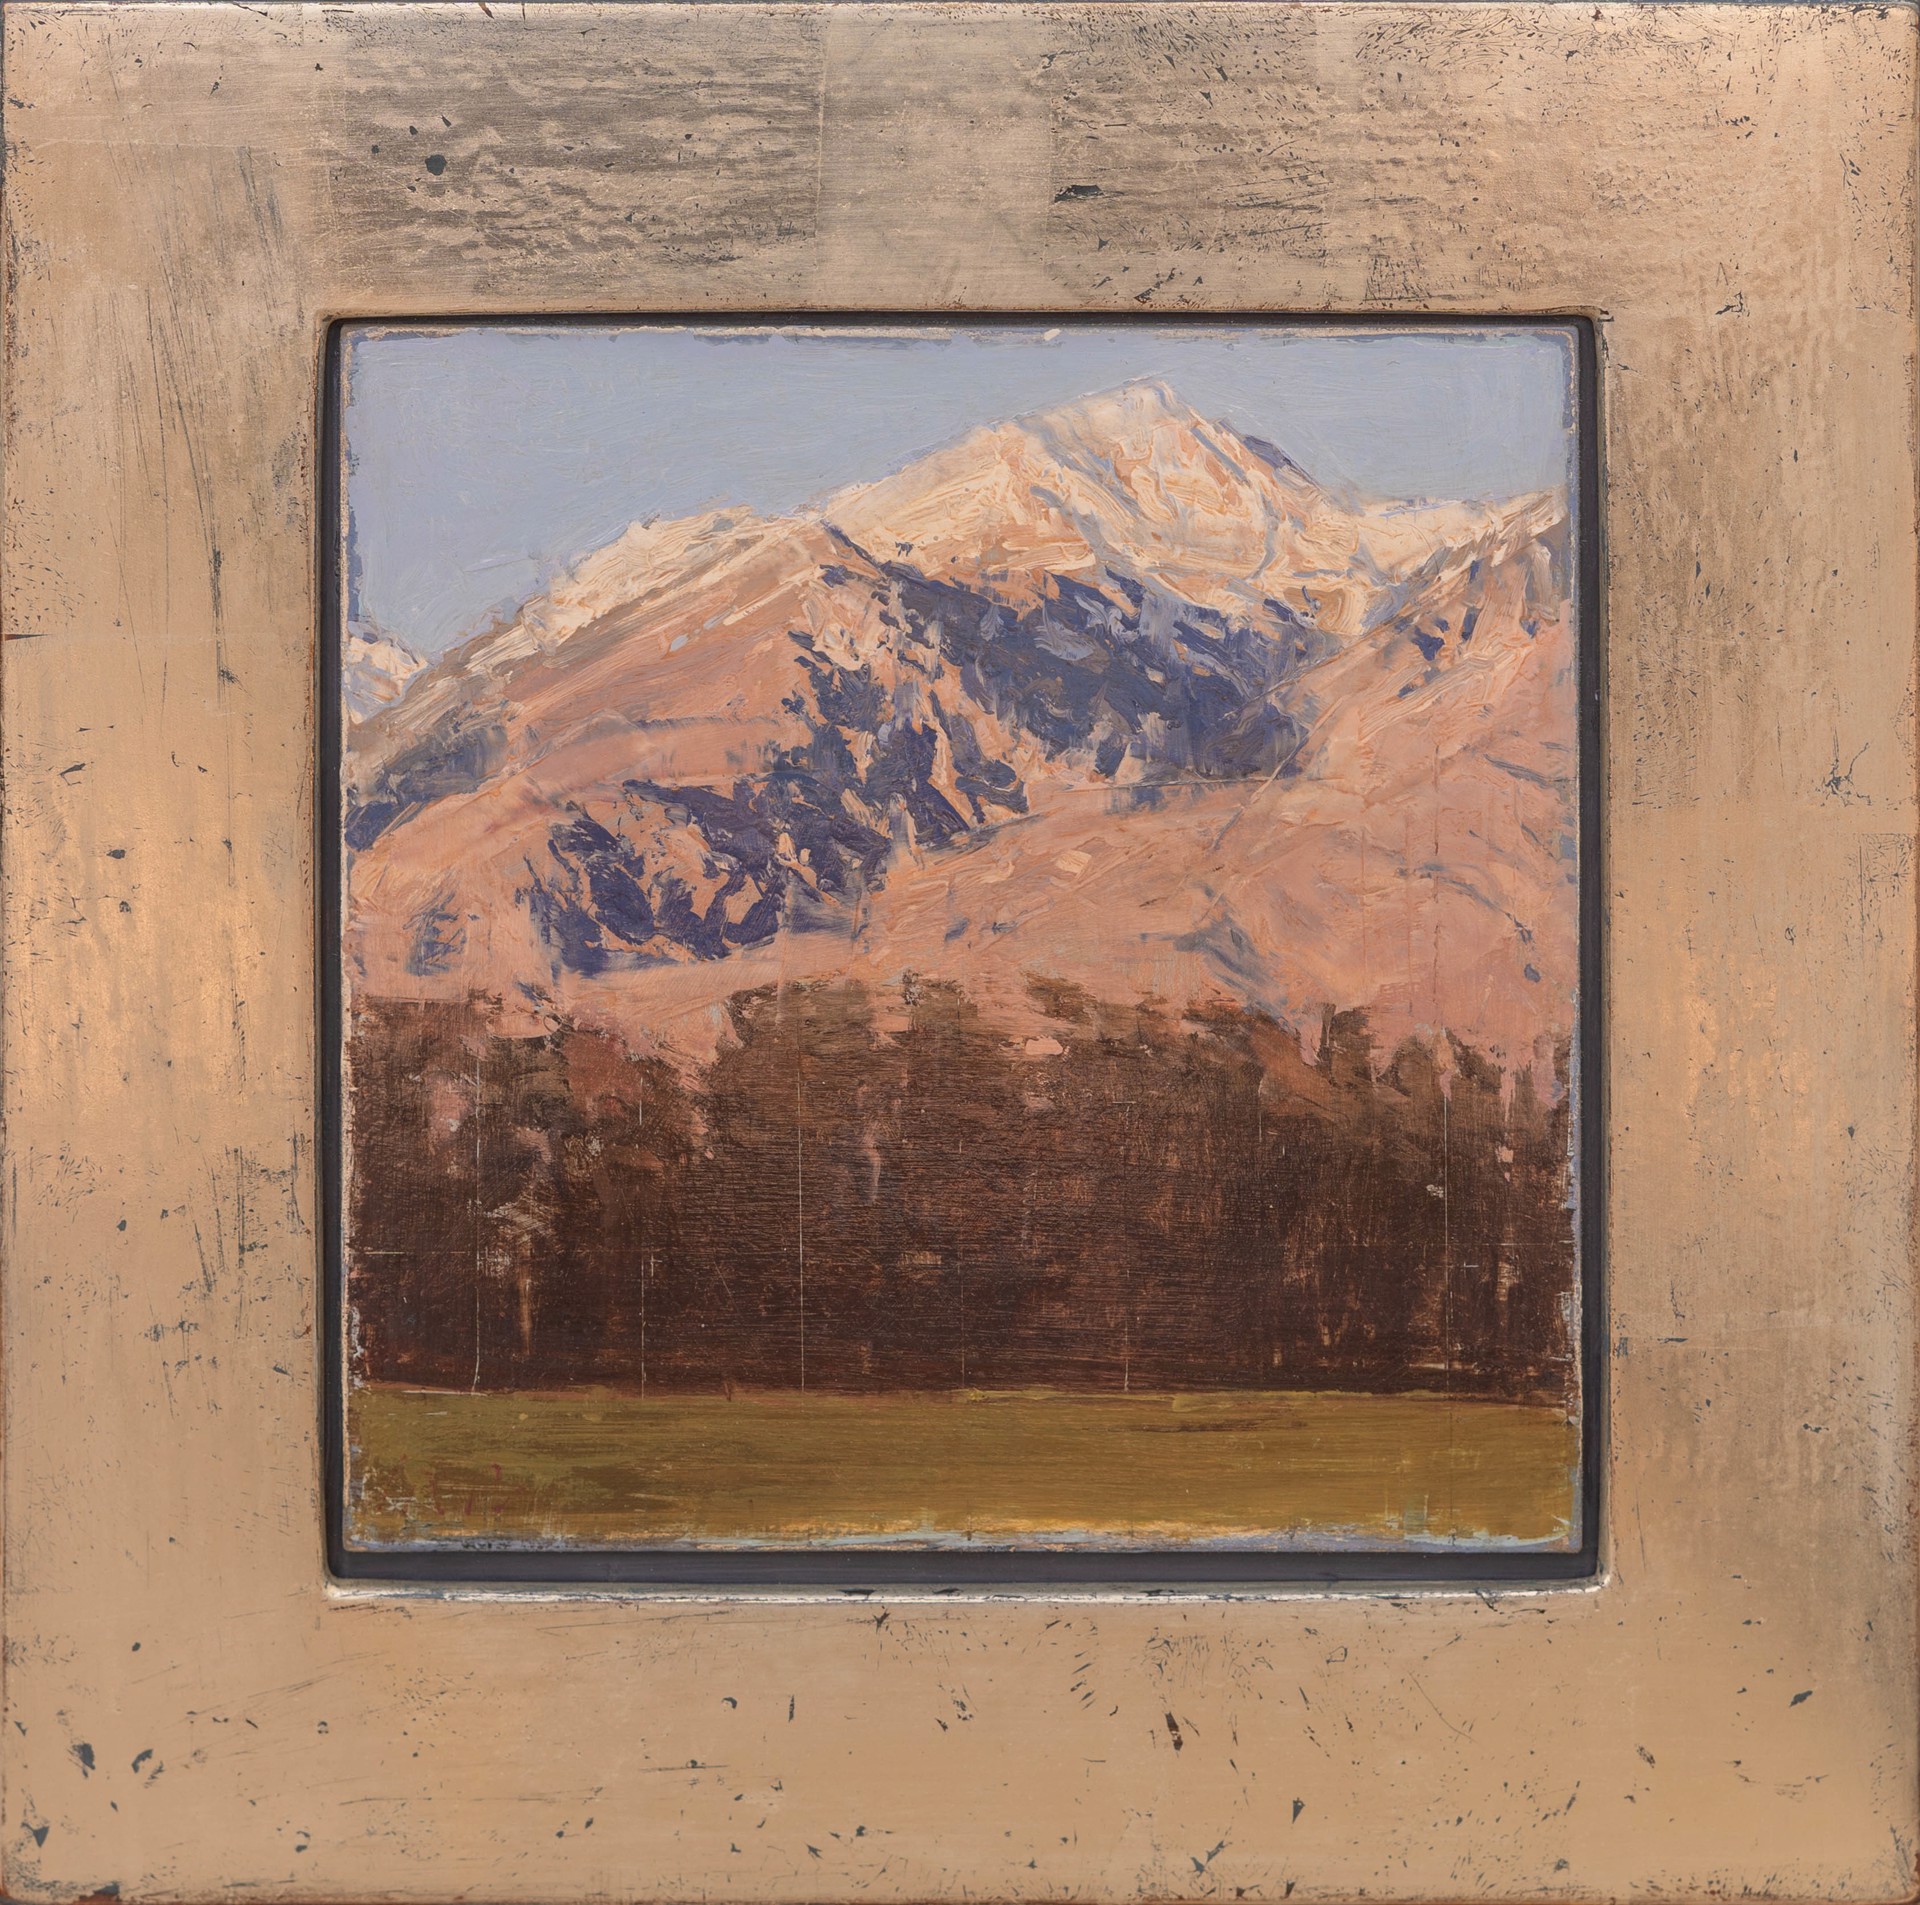 Mountains I Grew Up With #2 by Michael Workman